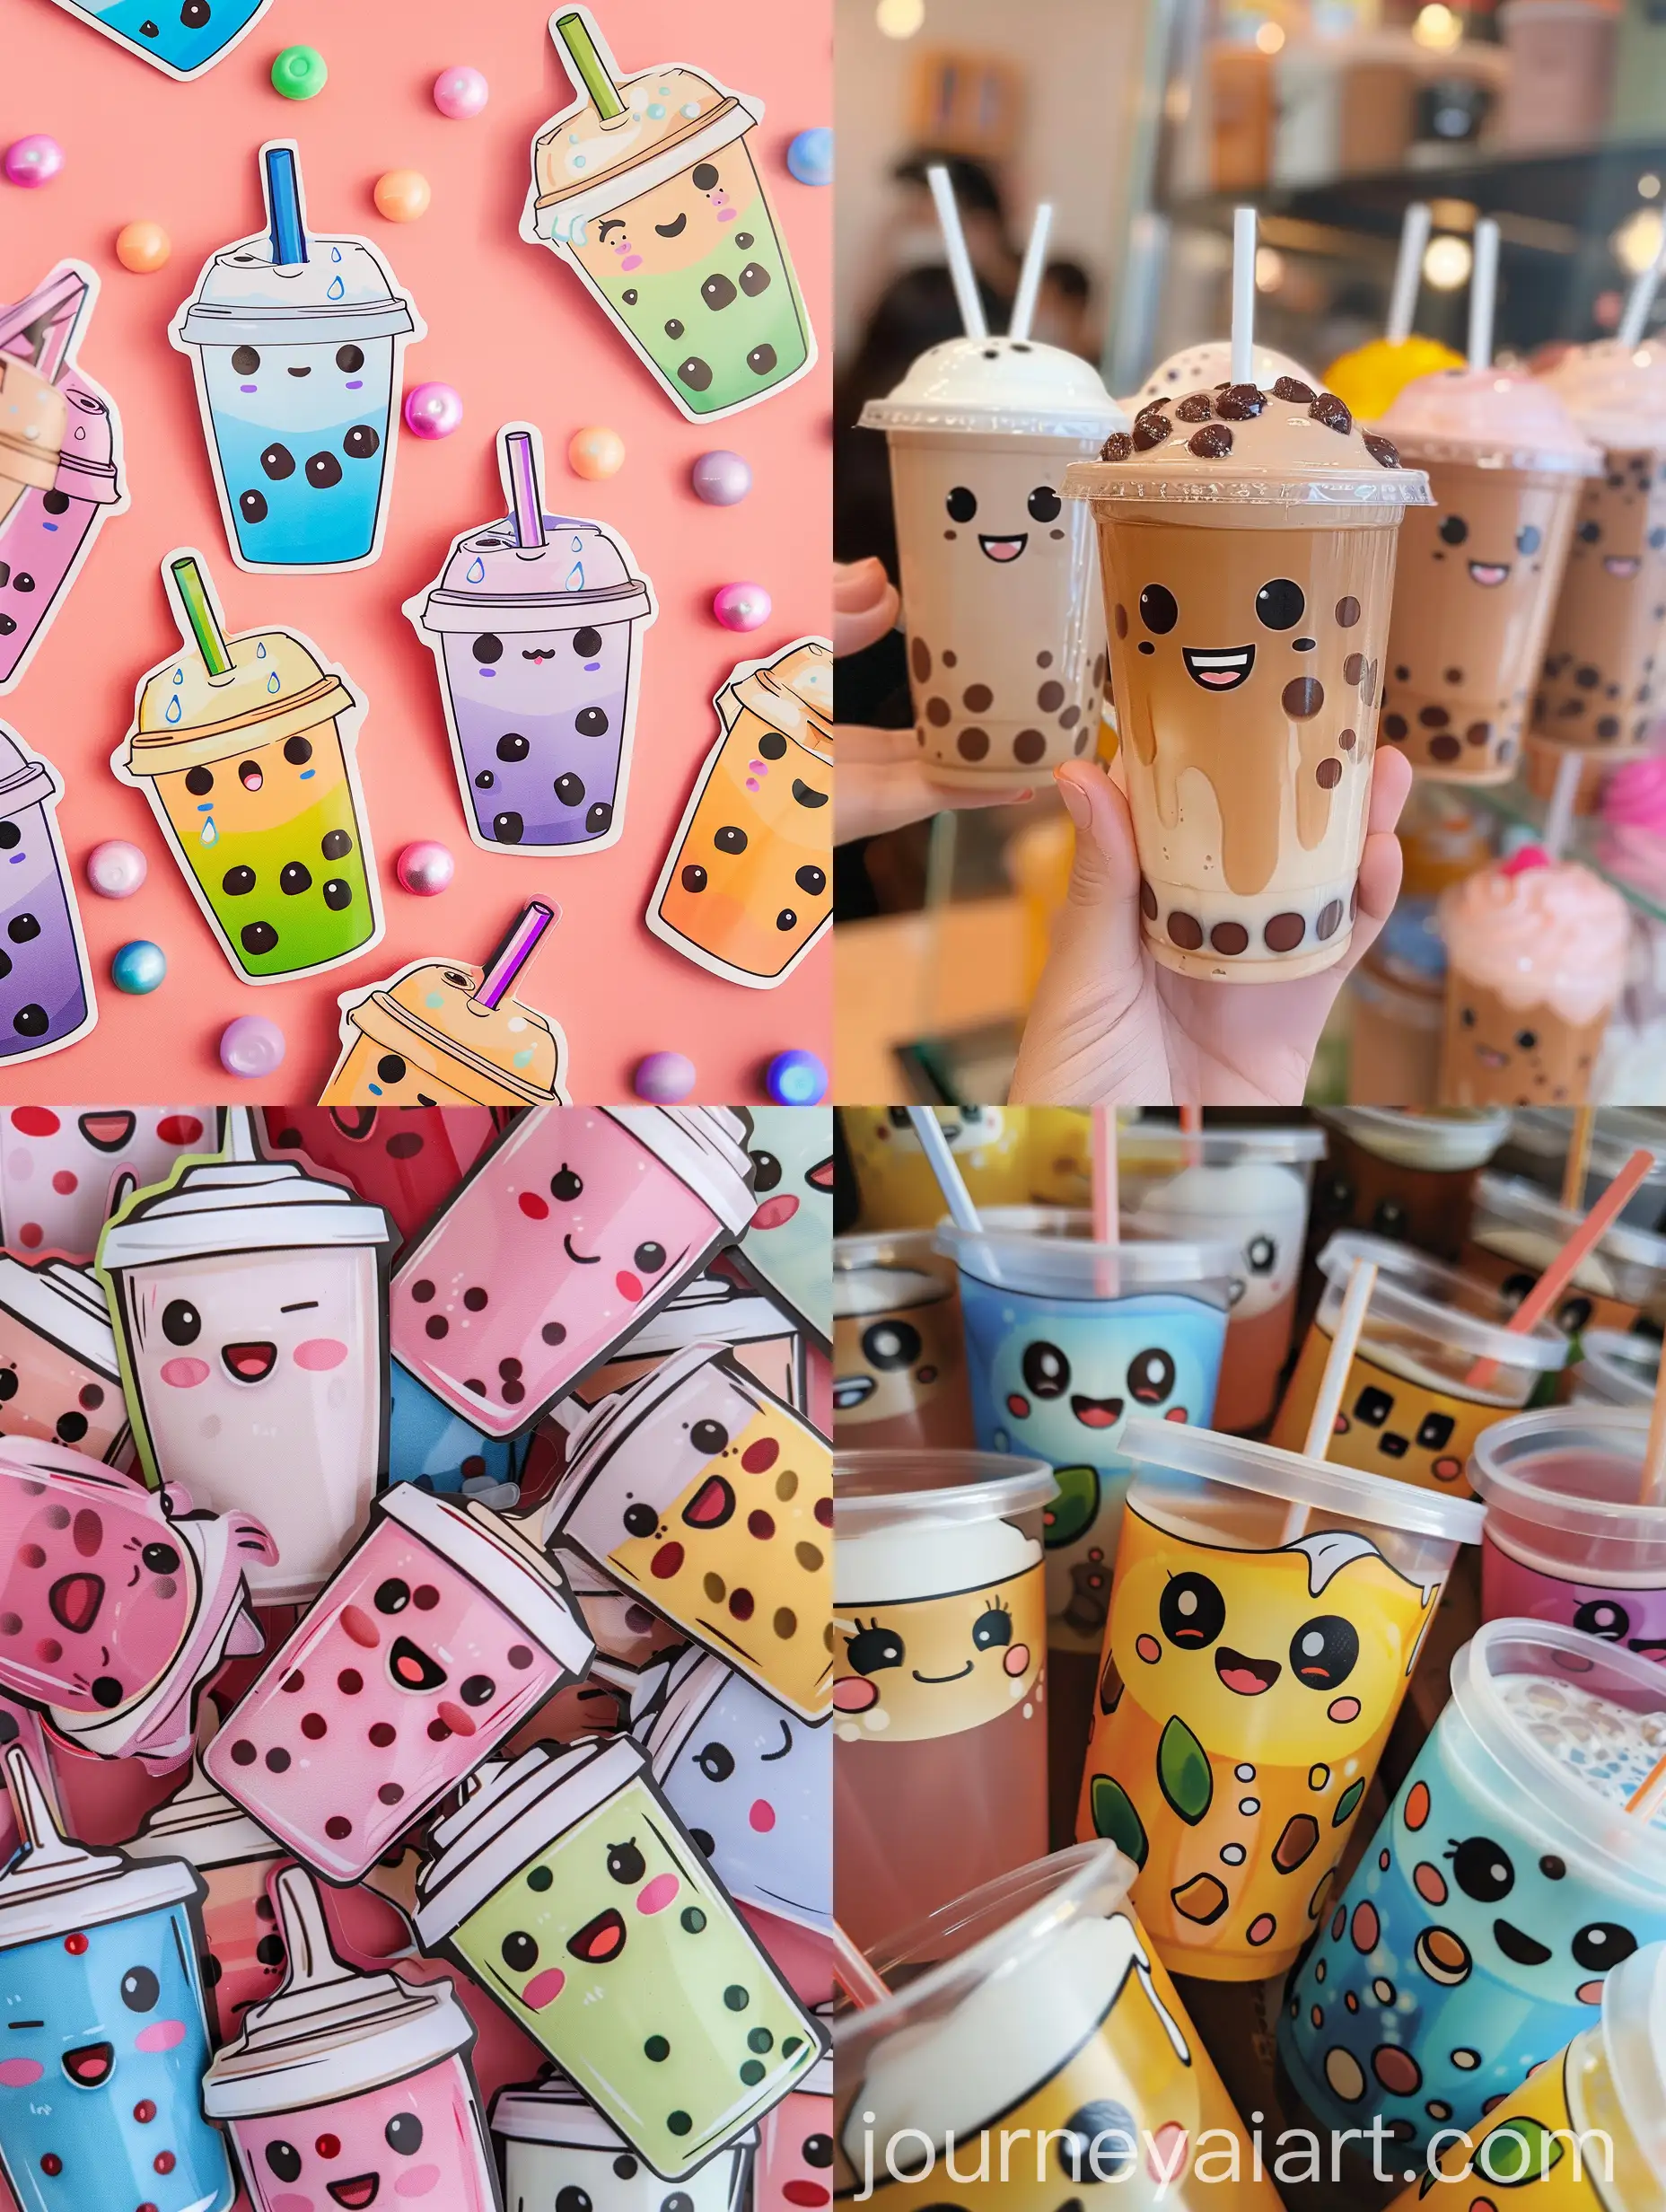 Set-of-10-Cute-Boba-Tea-Stickers-with-Adorable-Faces